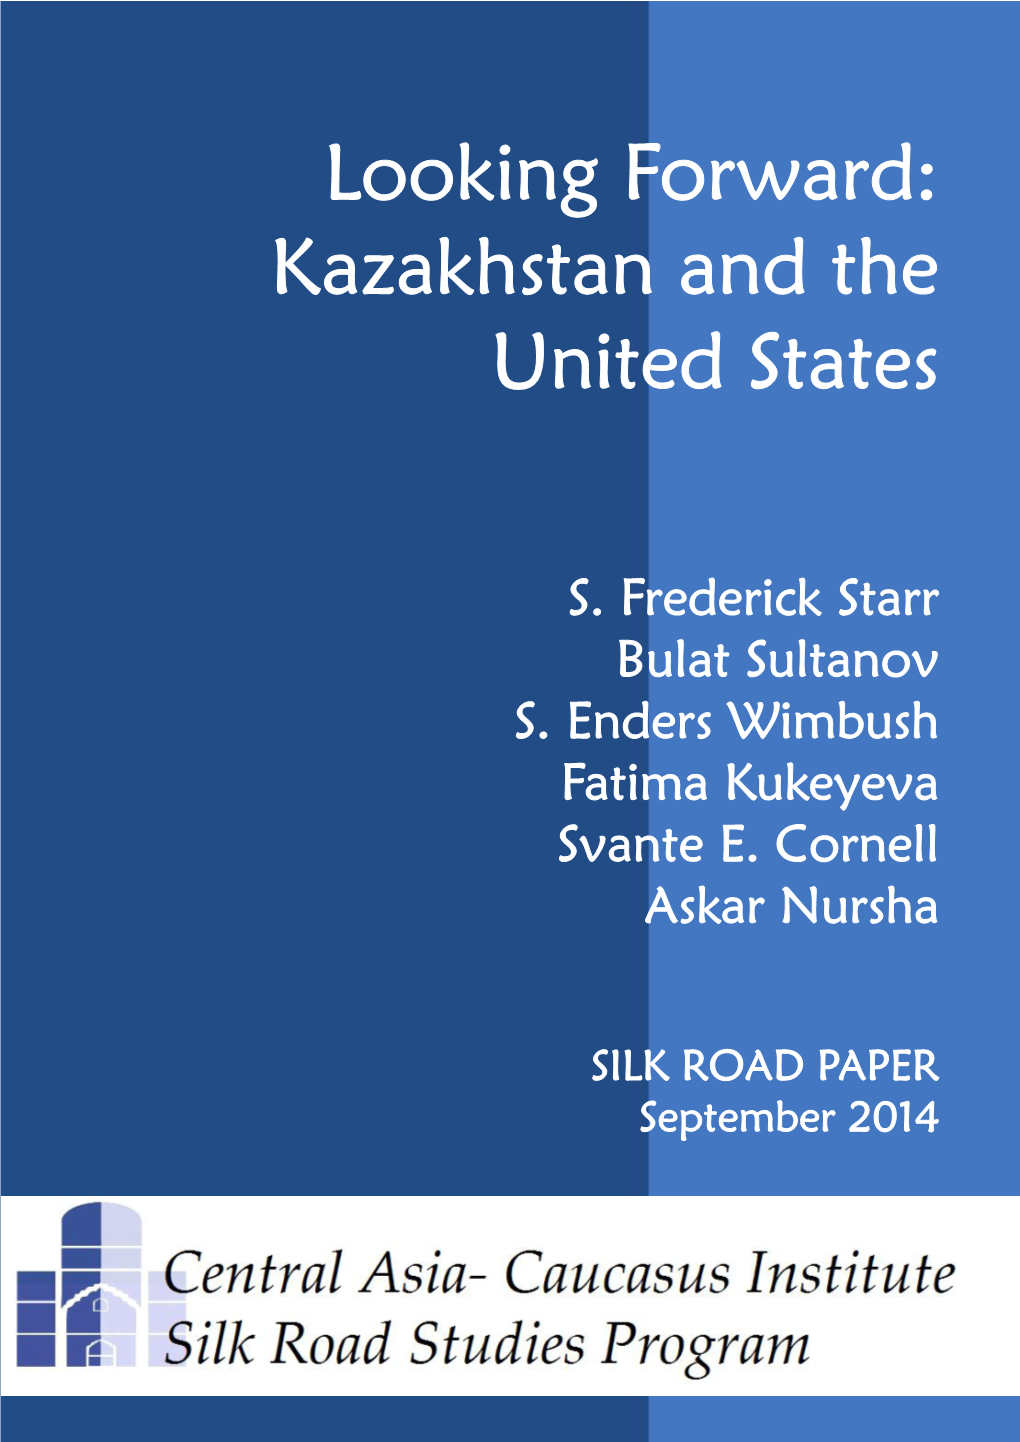 Looking Forward: Kazakhstan and the United States